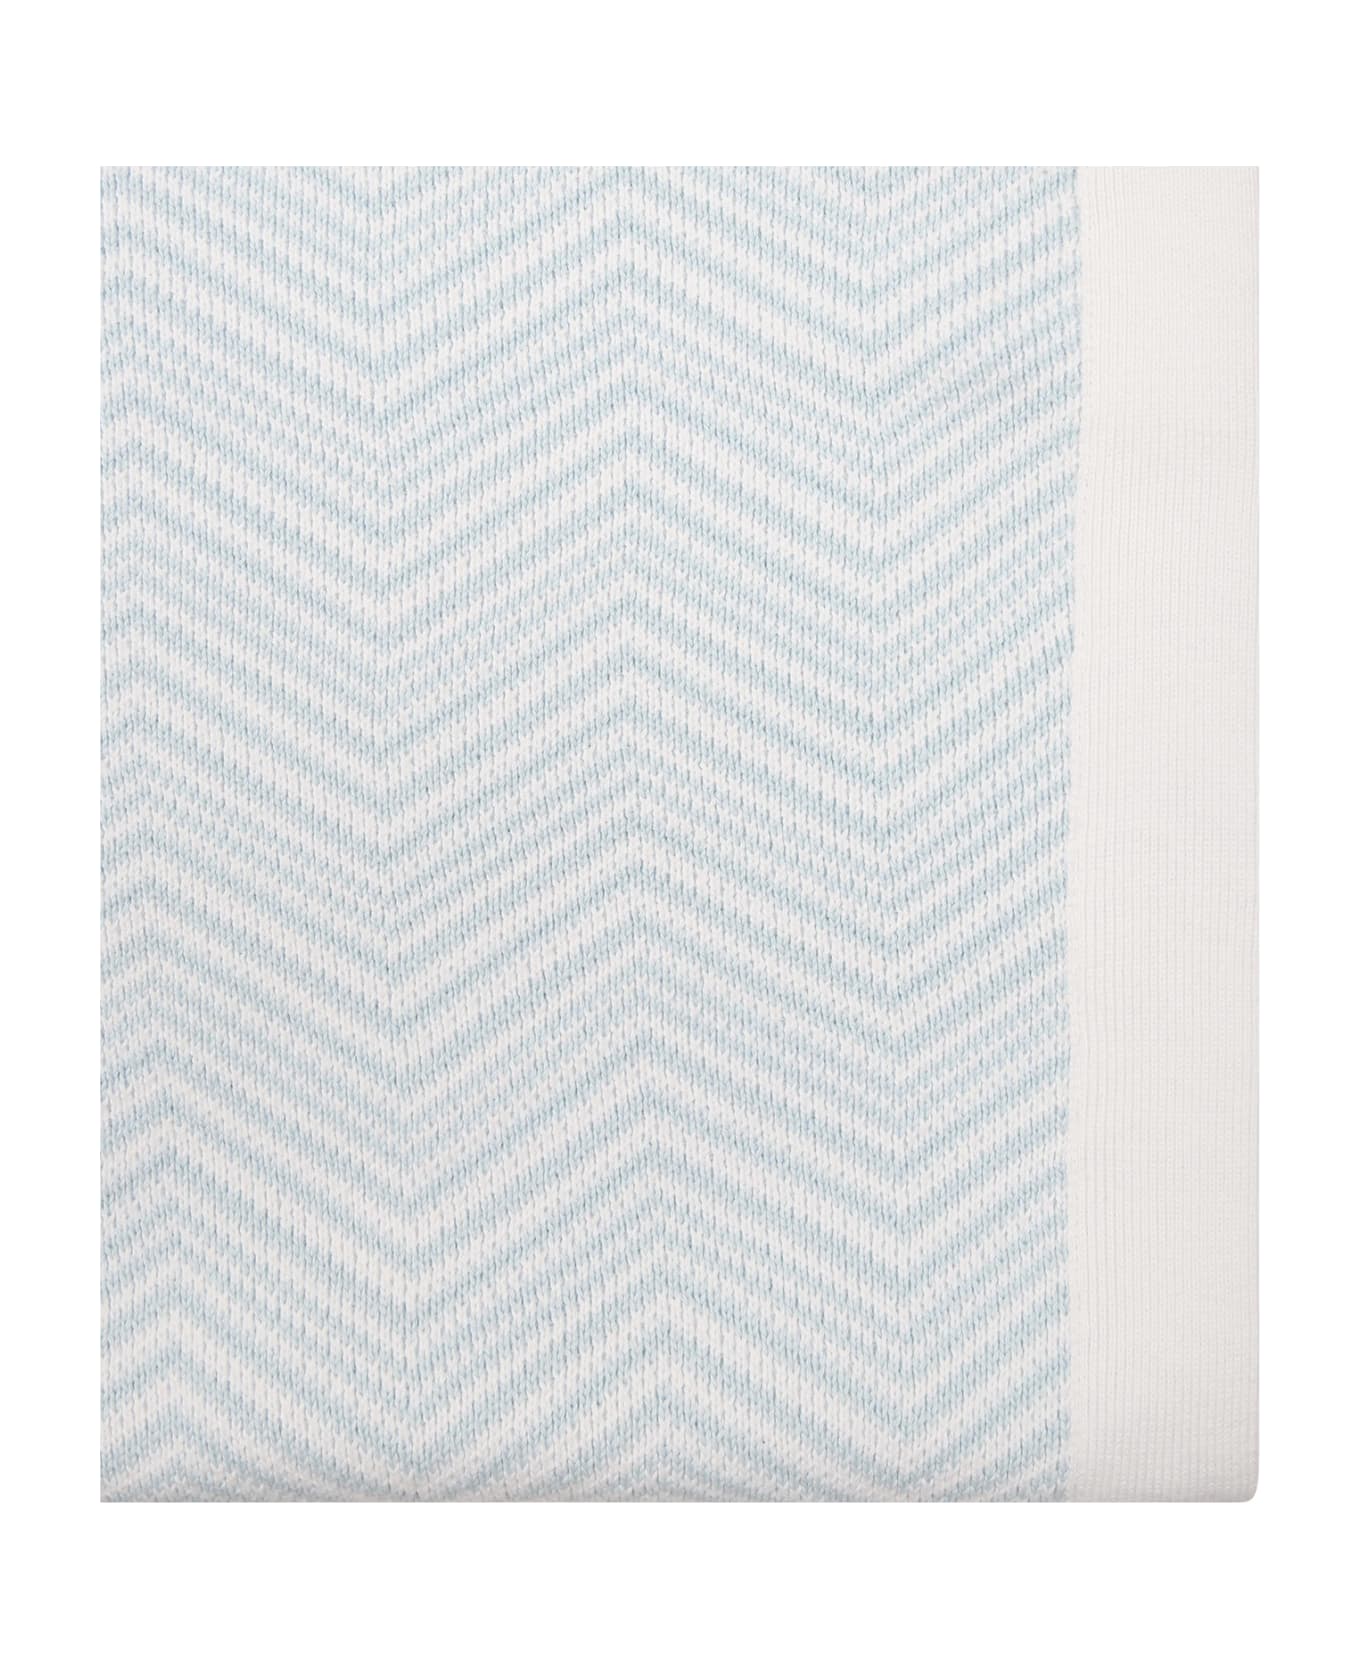 Missoni Light Blue Blanket For Baby Boy With Chevron Pattern - Light Blue アクセサリー＆ギフト